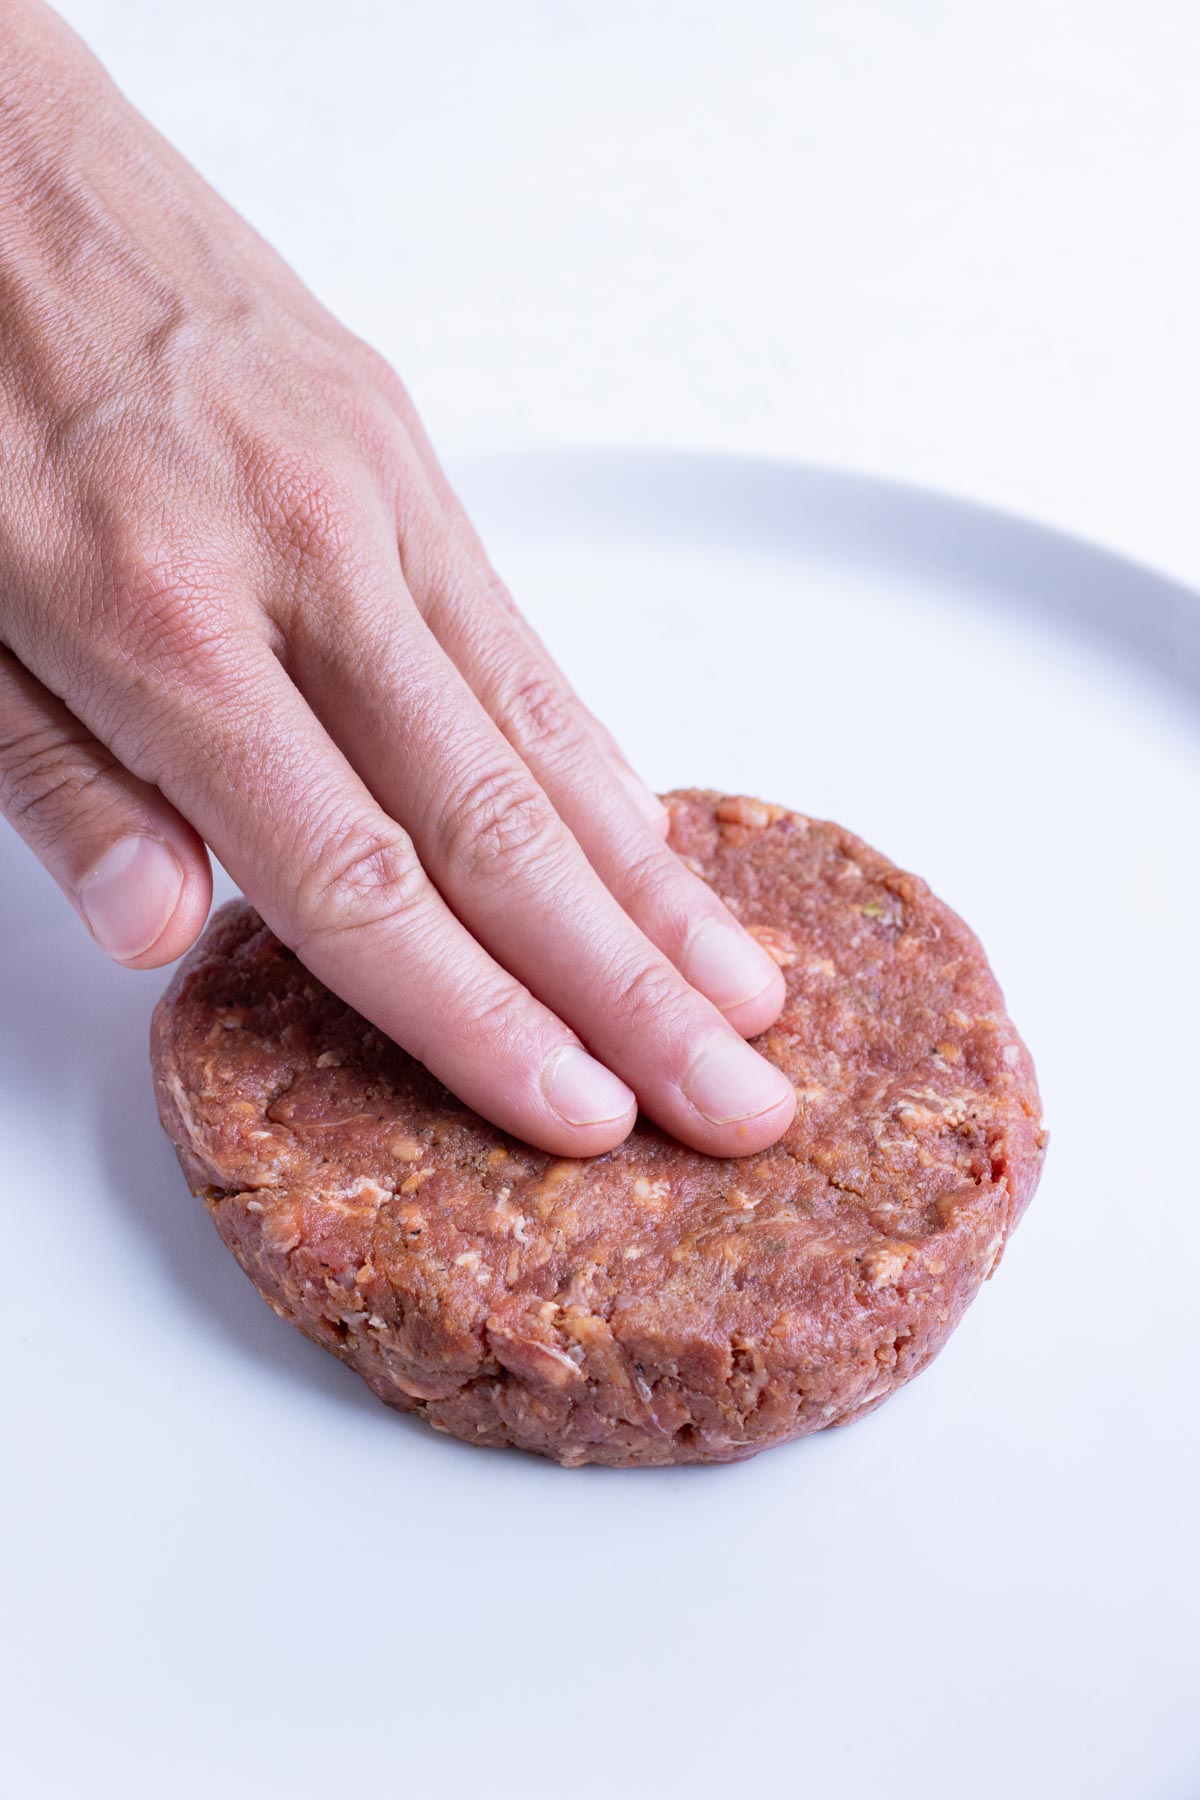 Hands are used to form a hamburger patty.